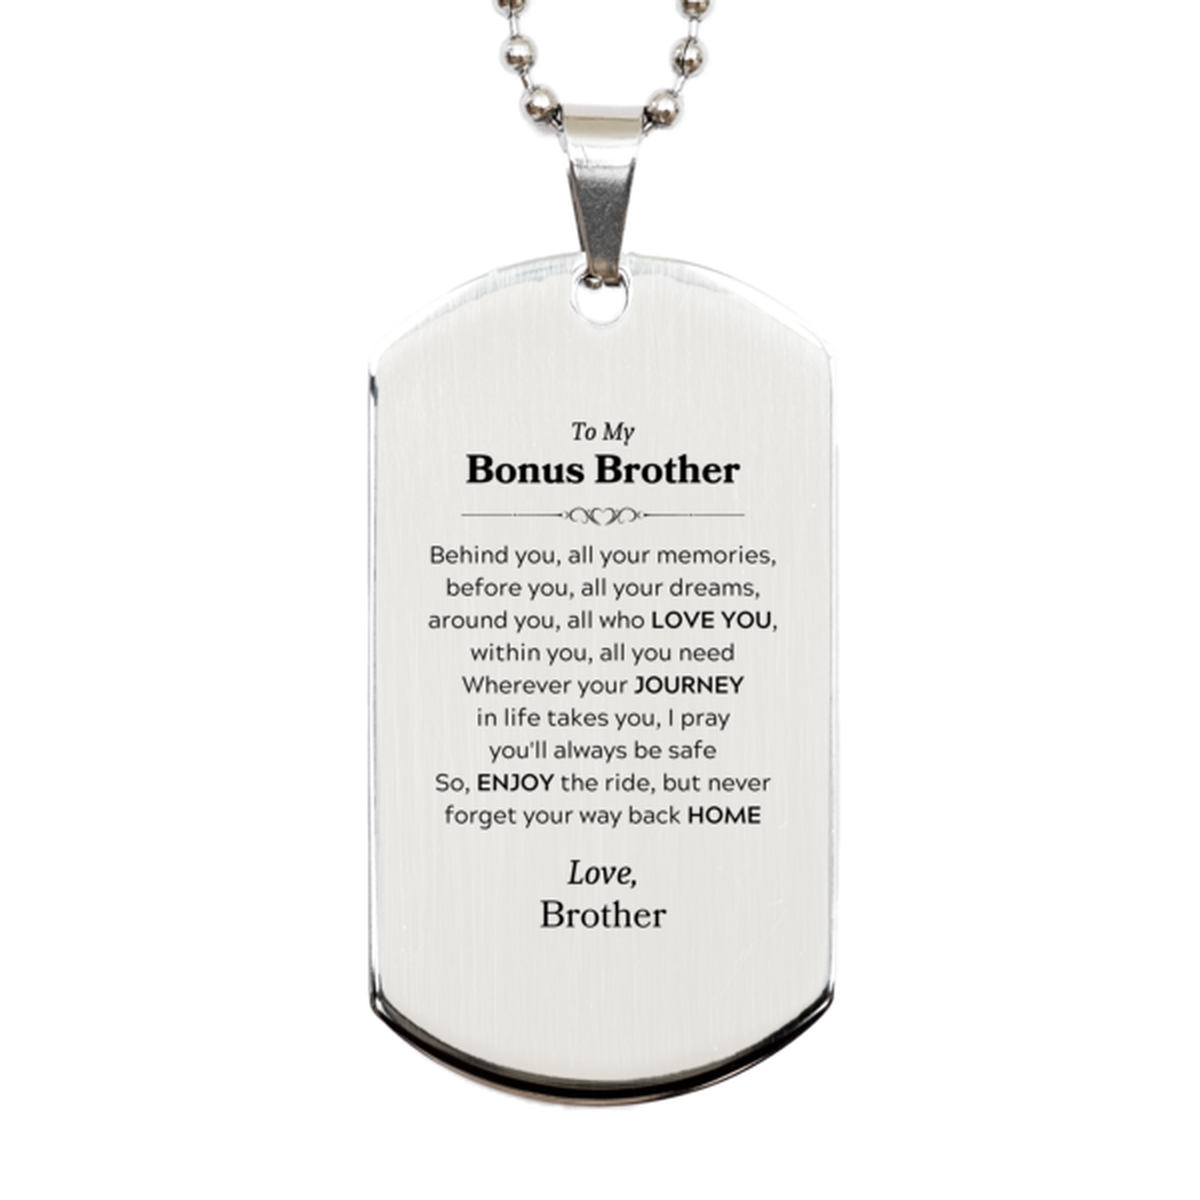 To My Bonus Brother Graduation Gifts from Brother, Bonus Brother Silver Dog Tag Christmas Birthday Gifts for Bonus Brother Behind you, all your memories, before you, all your dreams. Love, Brother